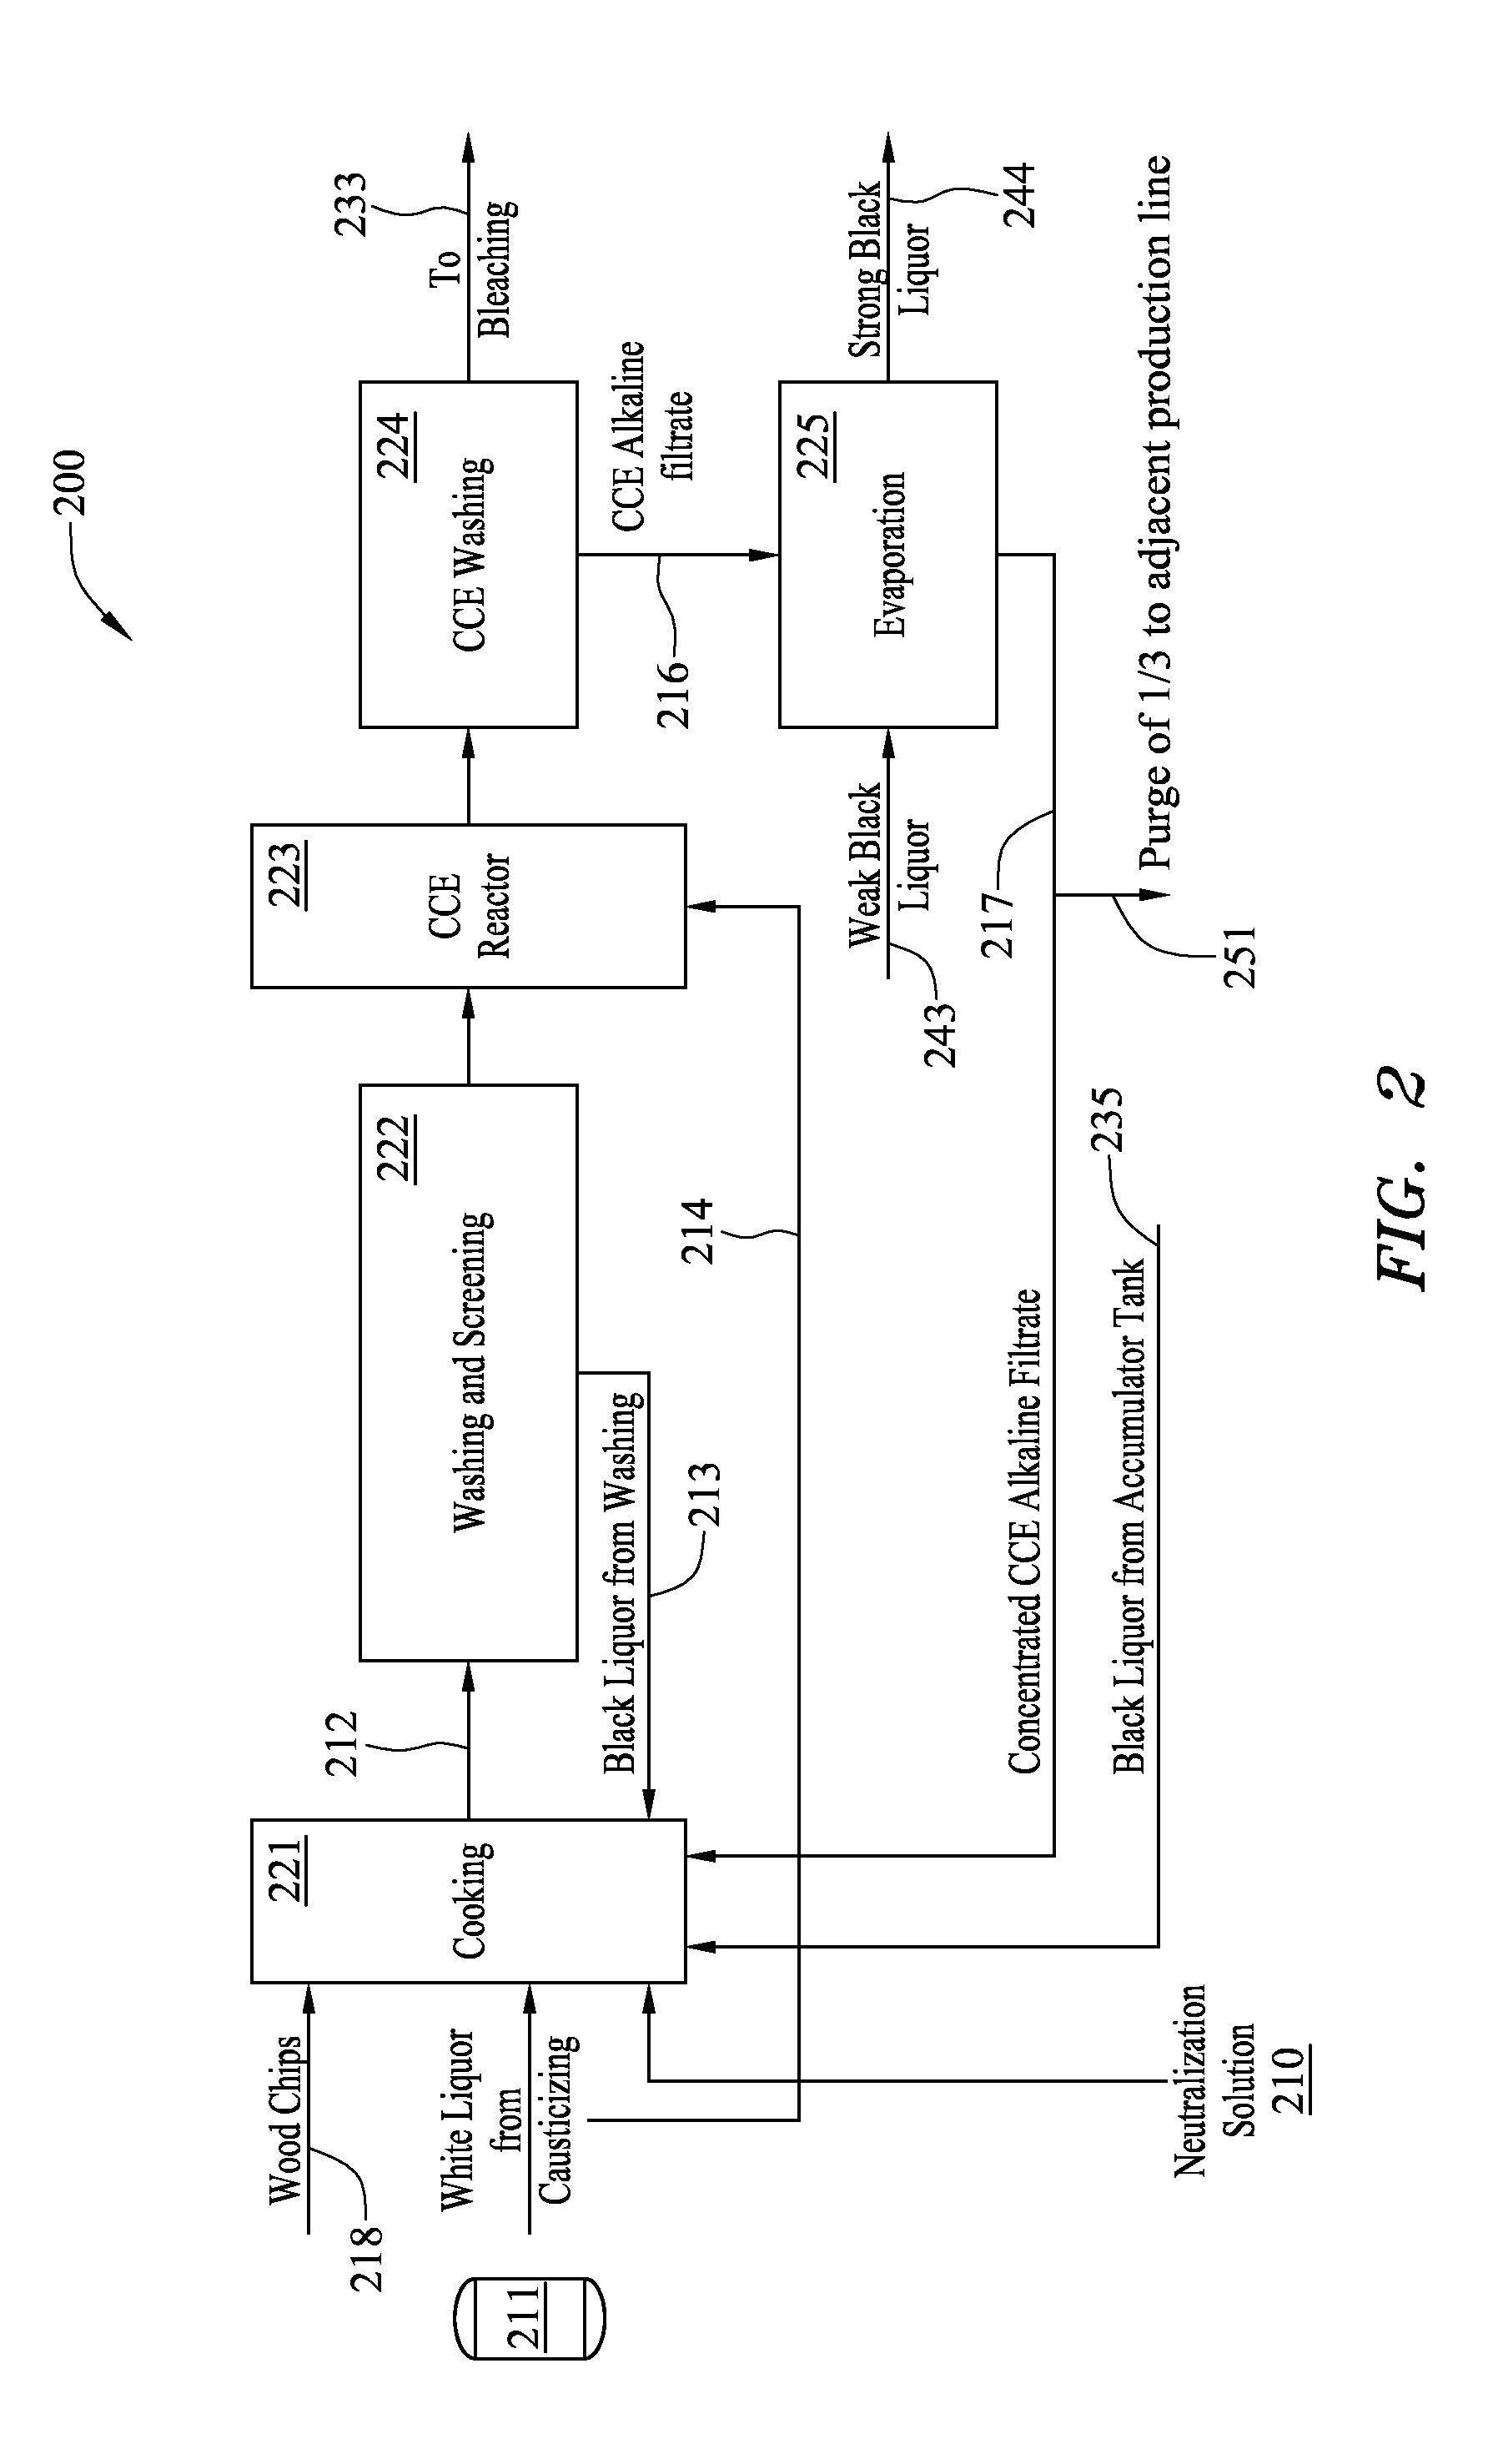 Method and system for pulp processing using cold caustic extraction with alkaline filtrate reuse